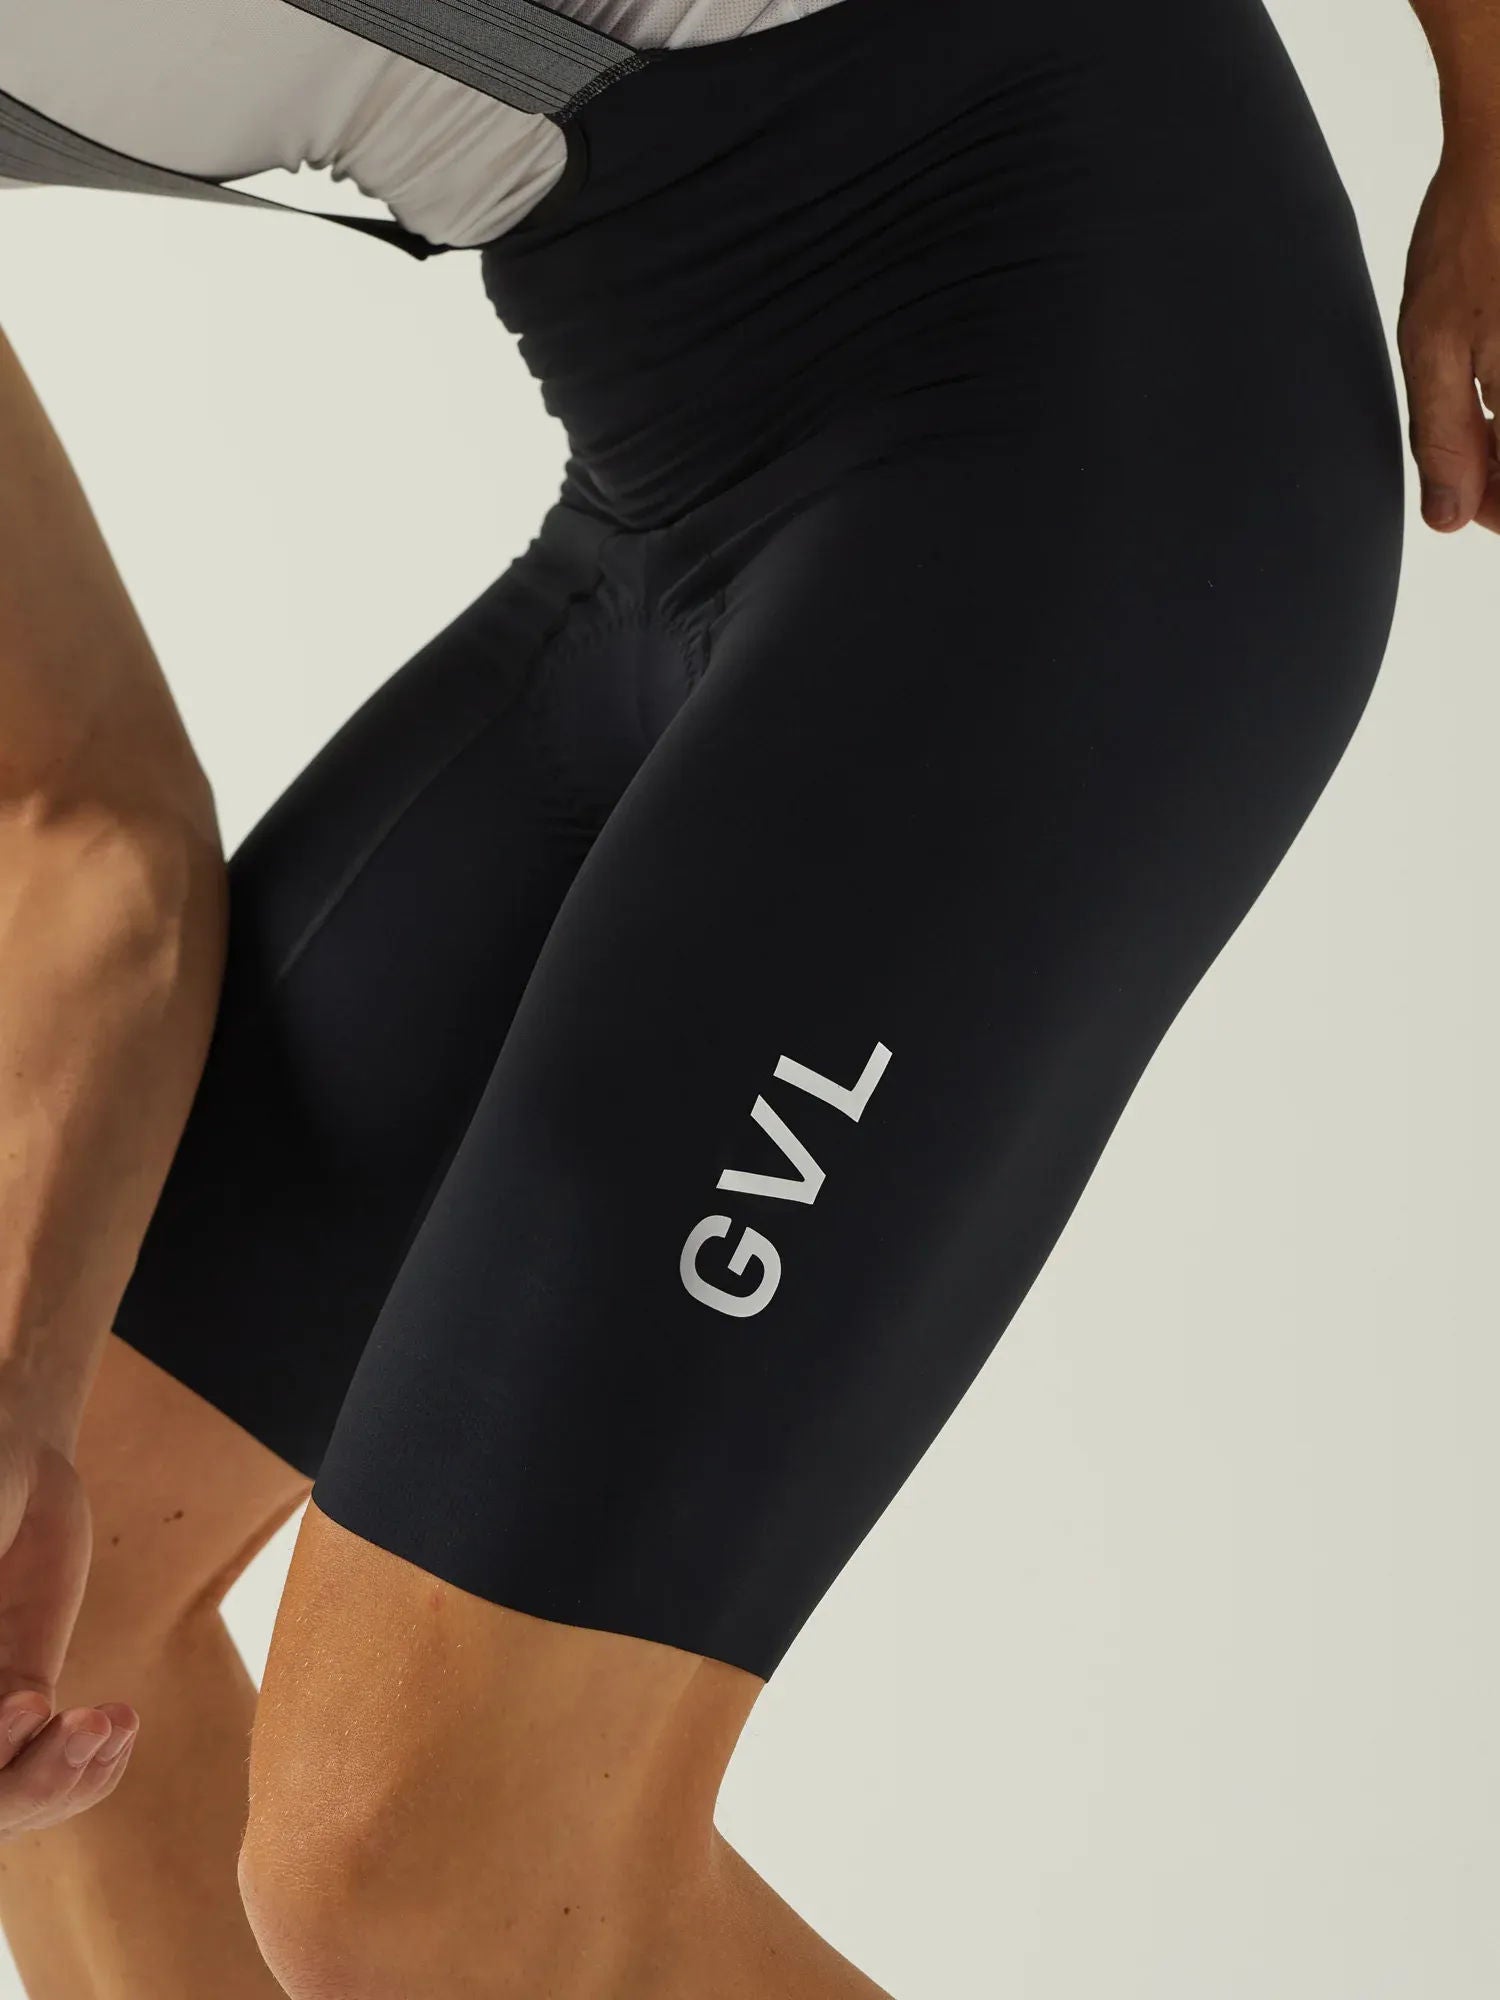 Givelo Lacefly Black メンズ ビブショーツ | GEARED